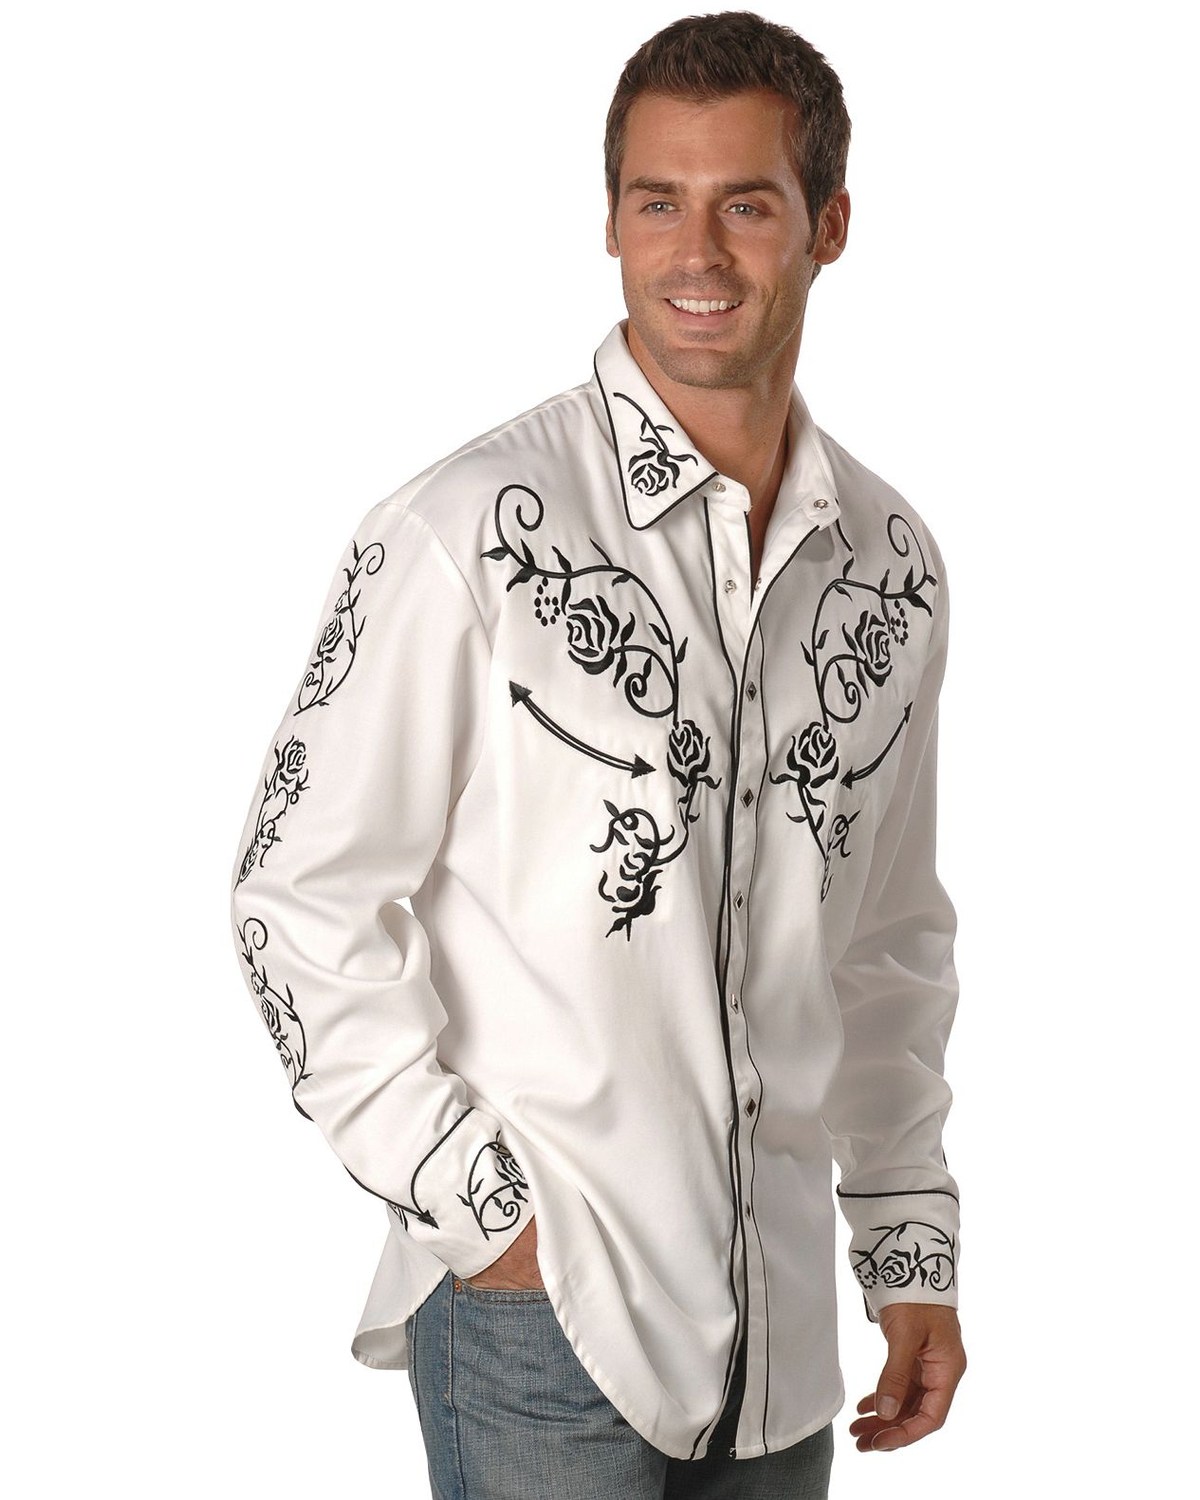 Scully New Men/'s Floral Embroidered Vintage Western Shirt White